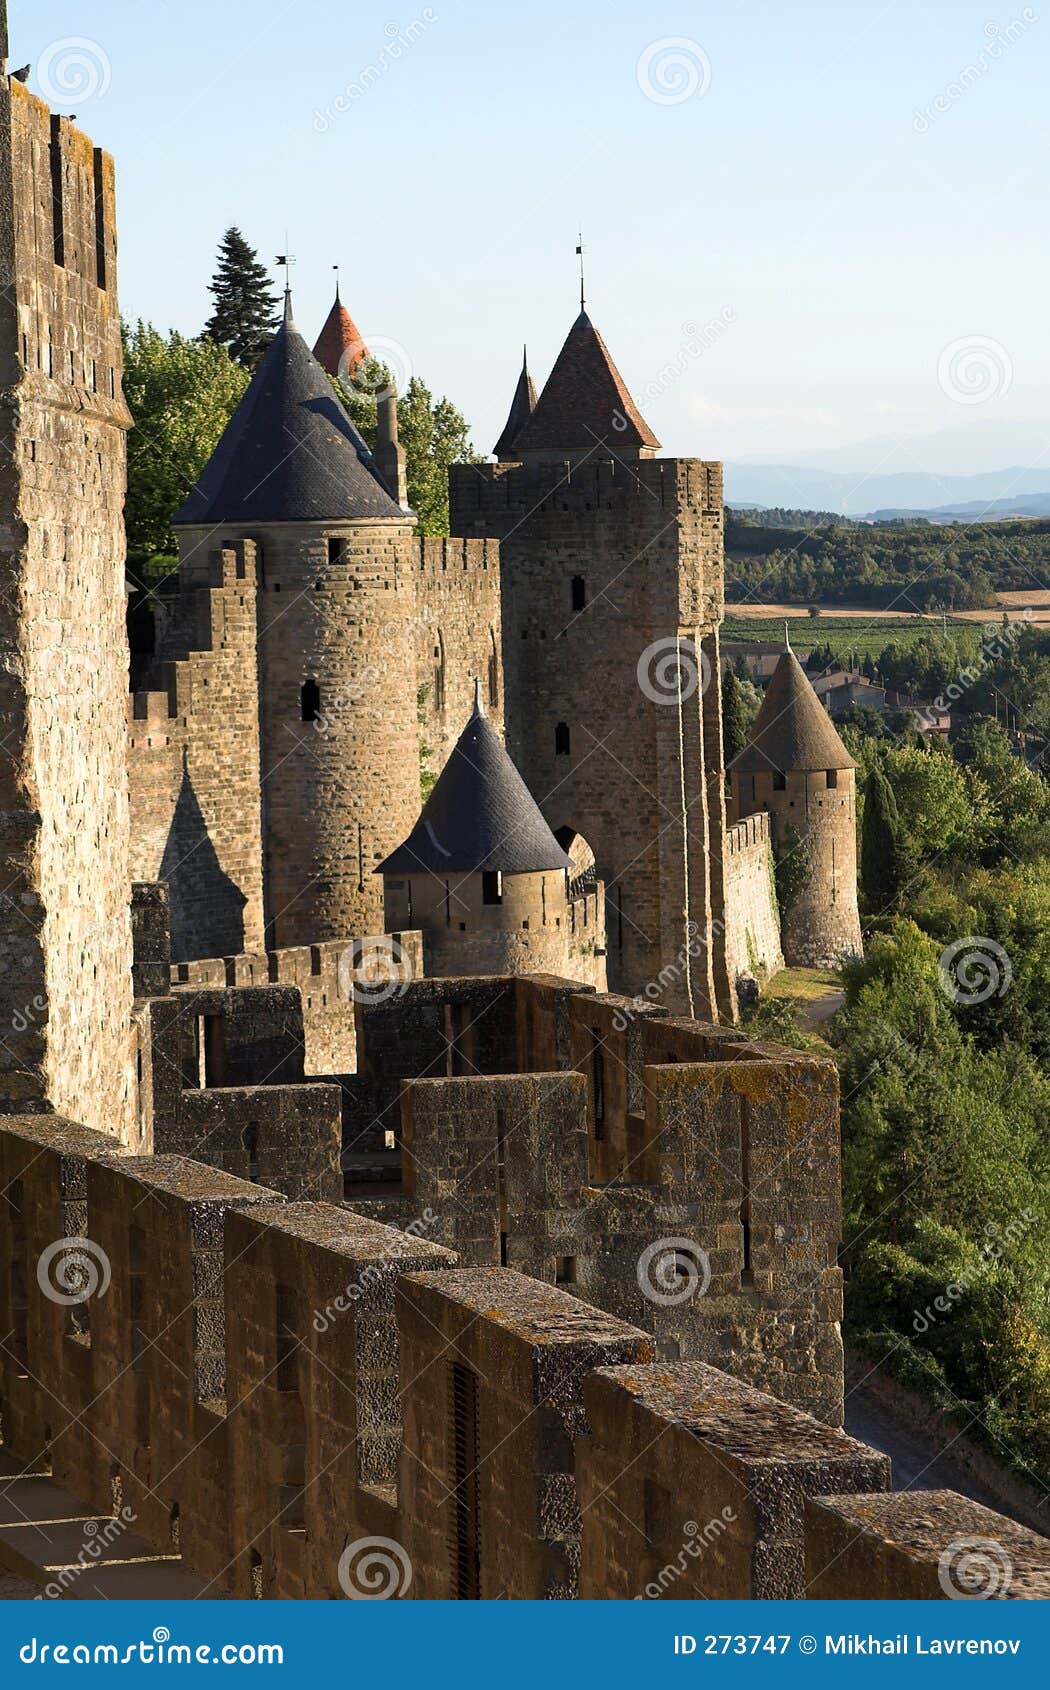 view at carcassonne castle and surroundings